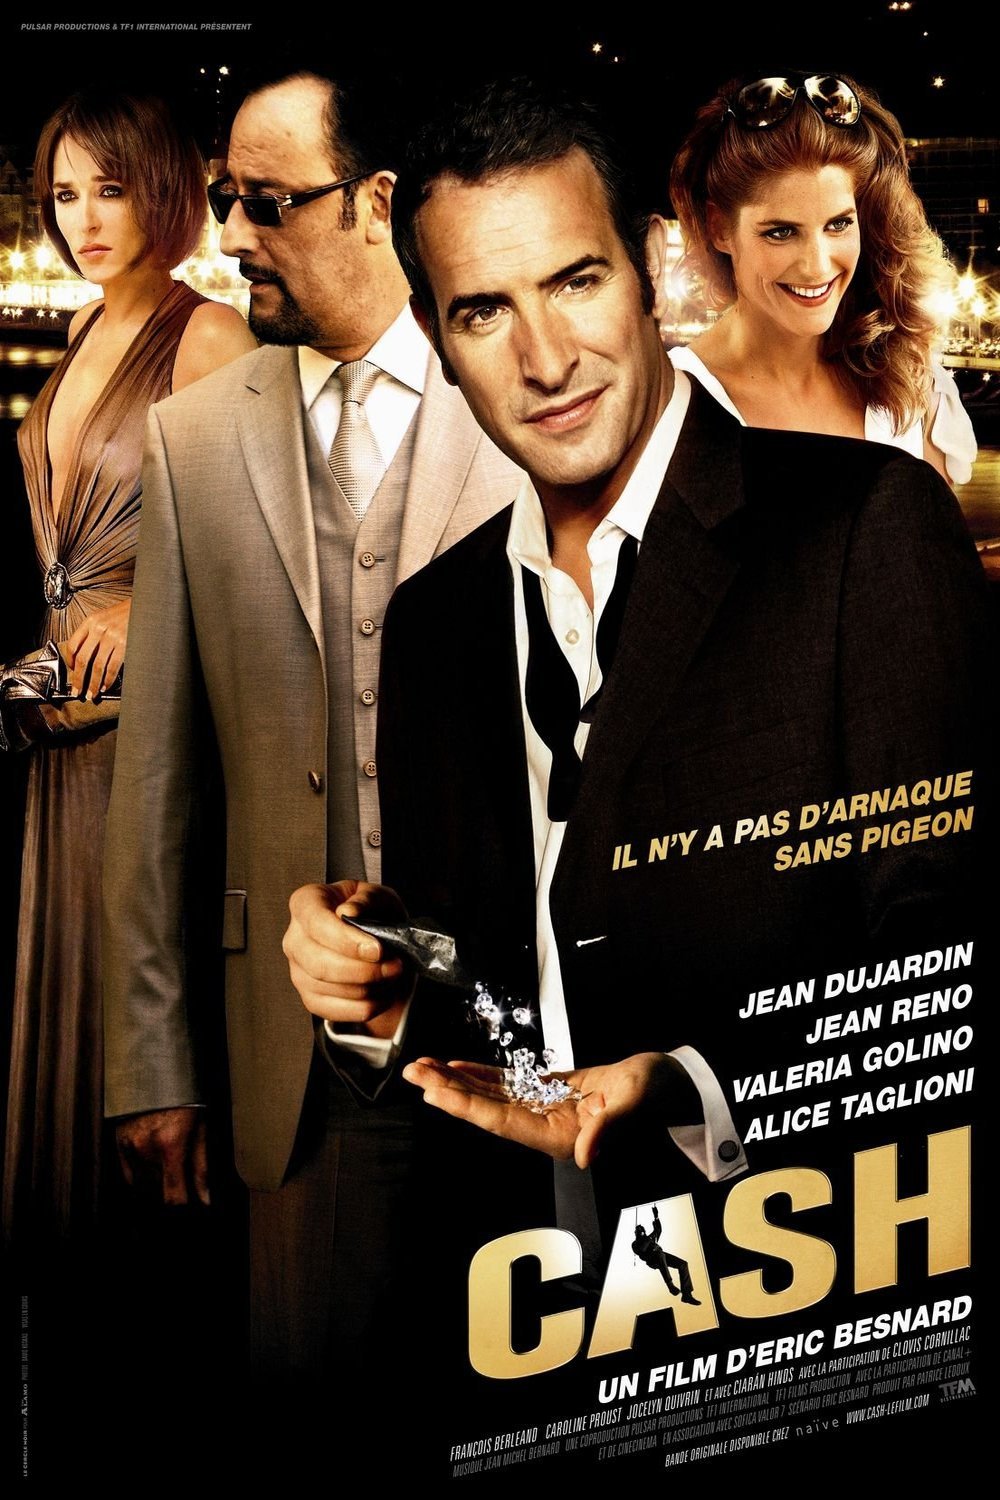 Poster of the movie Ca$h